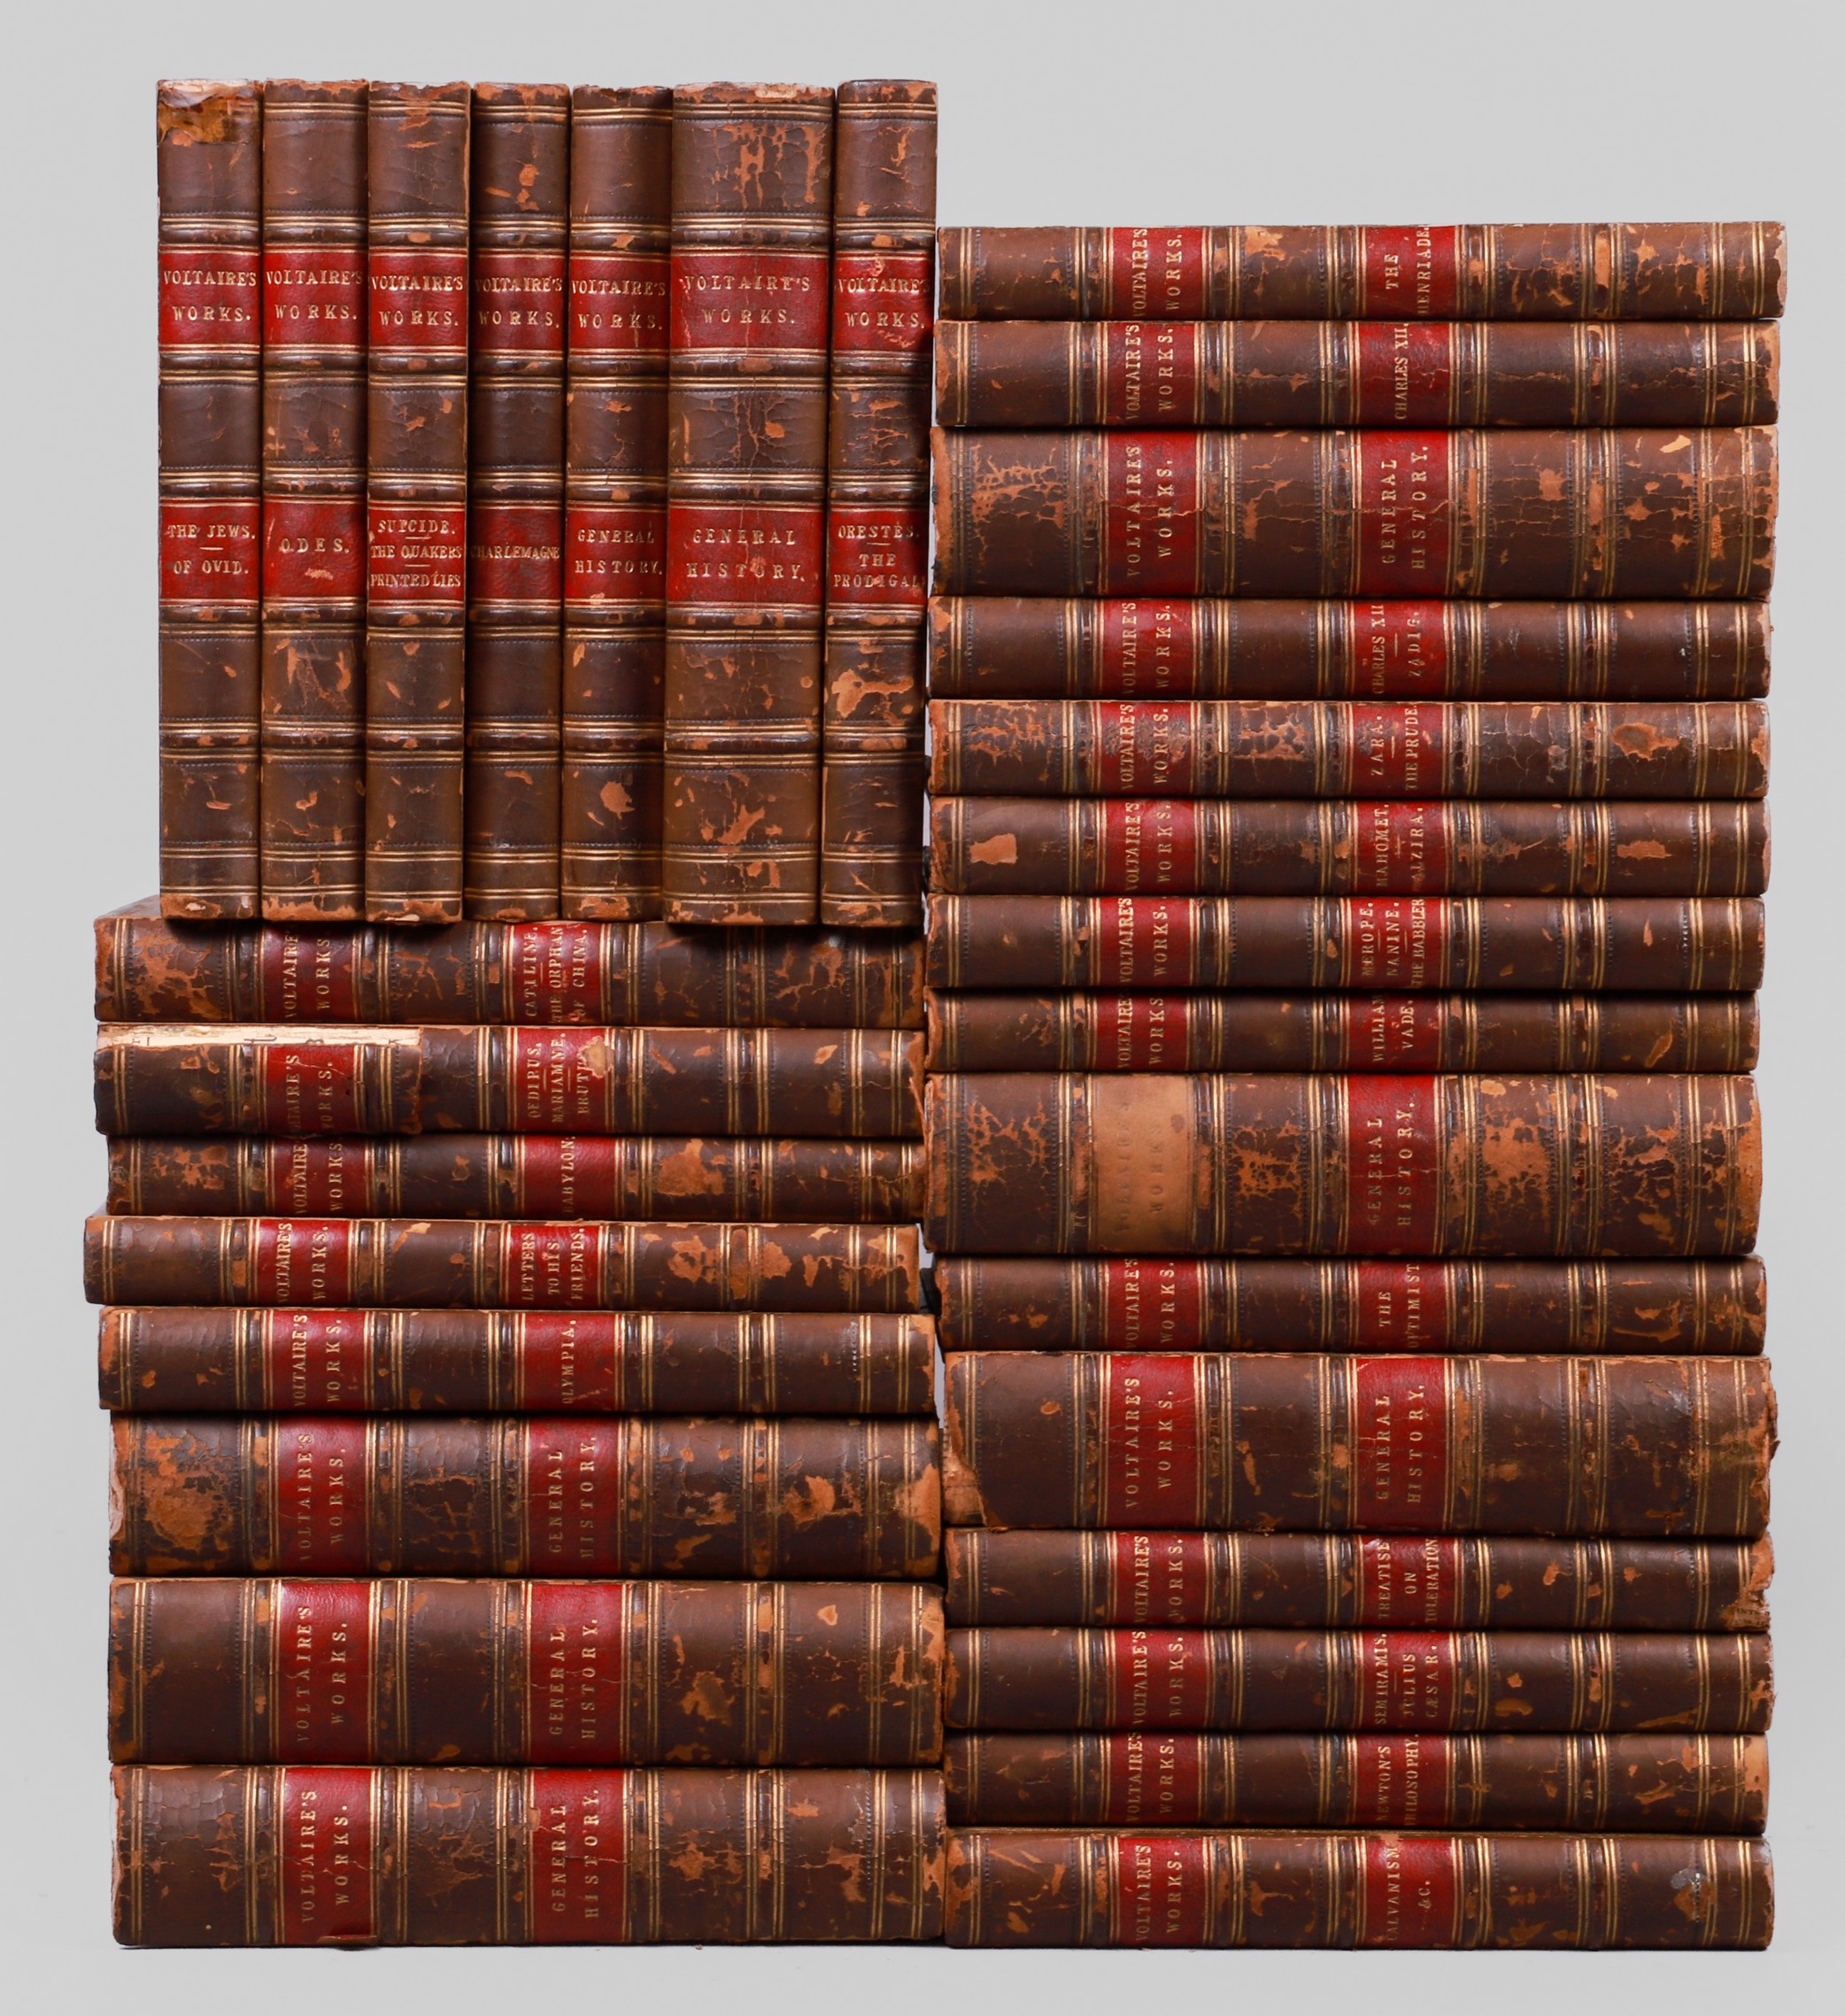 Thirty volumes from a set of the